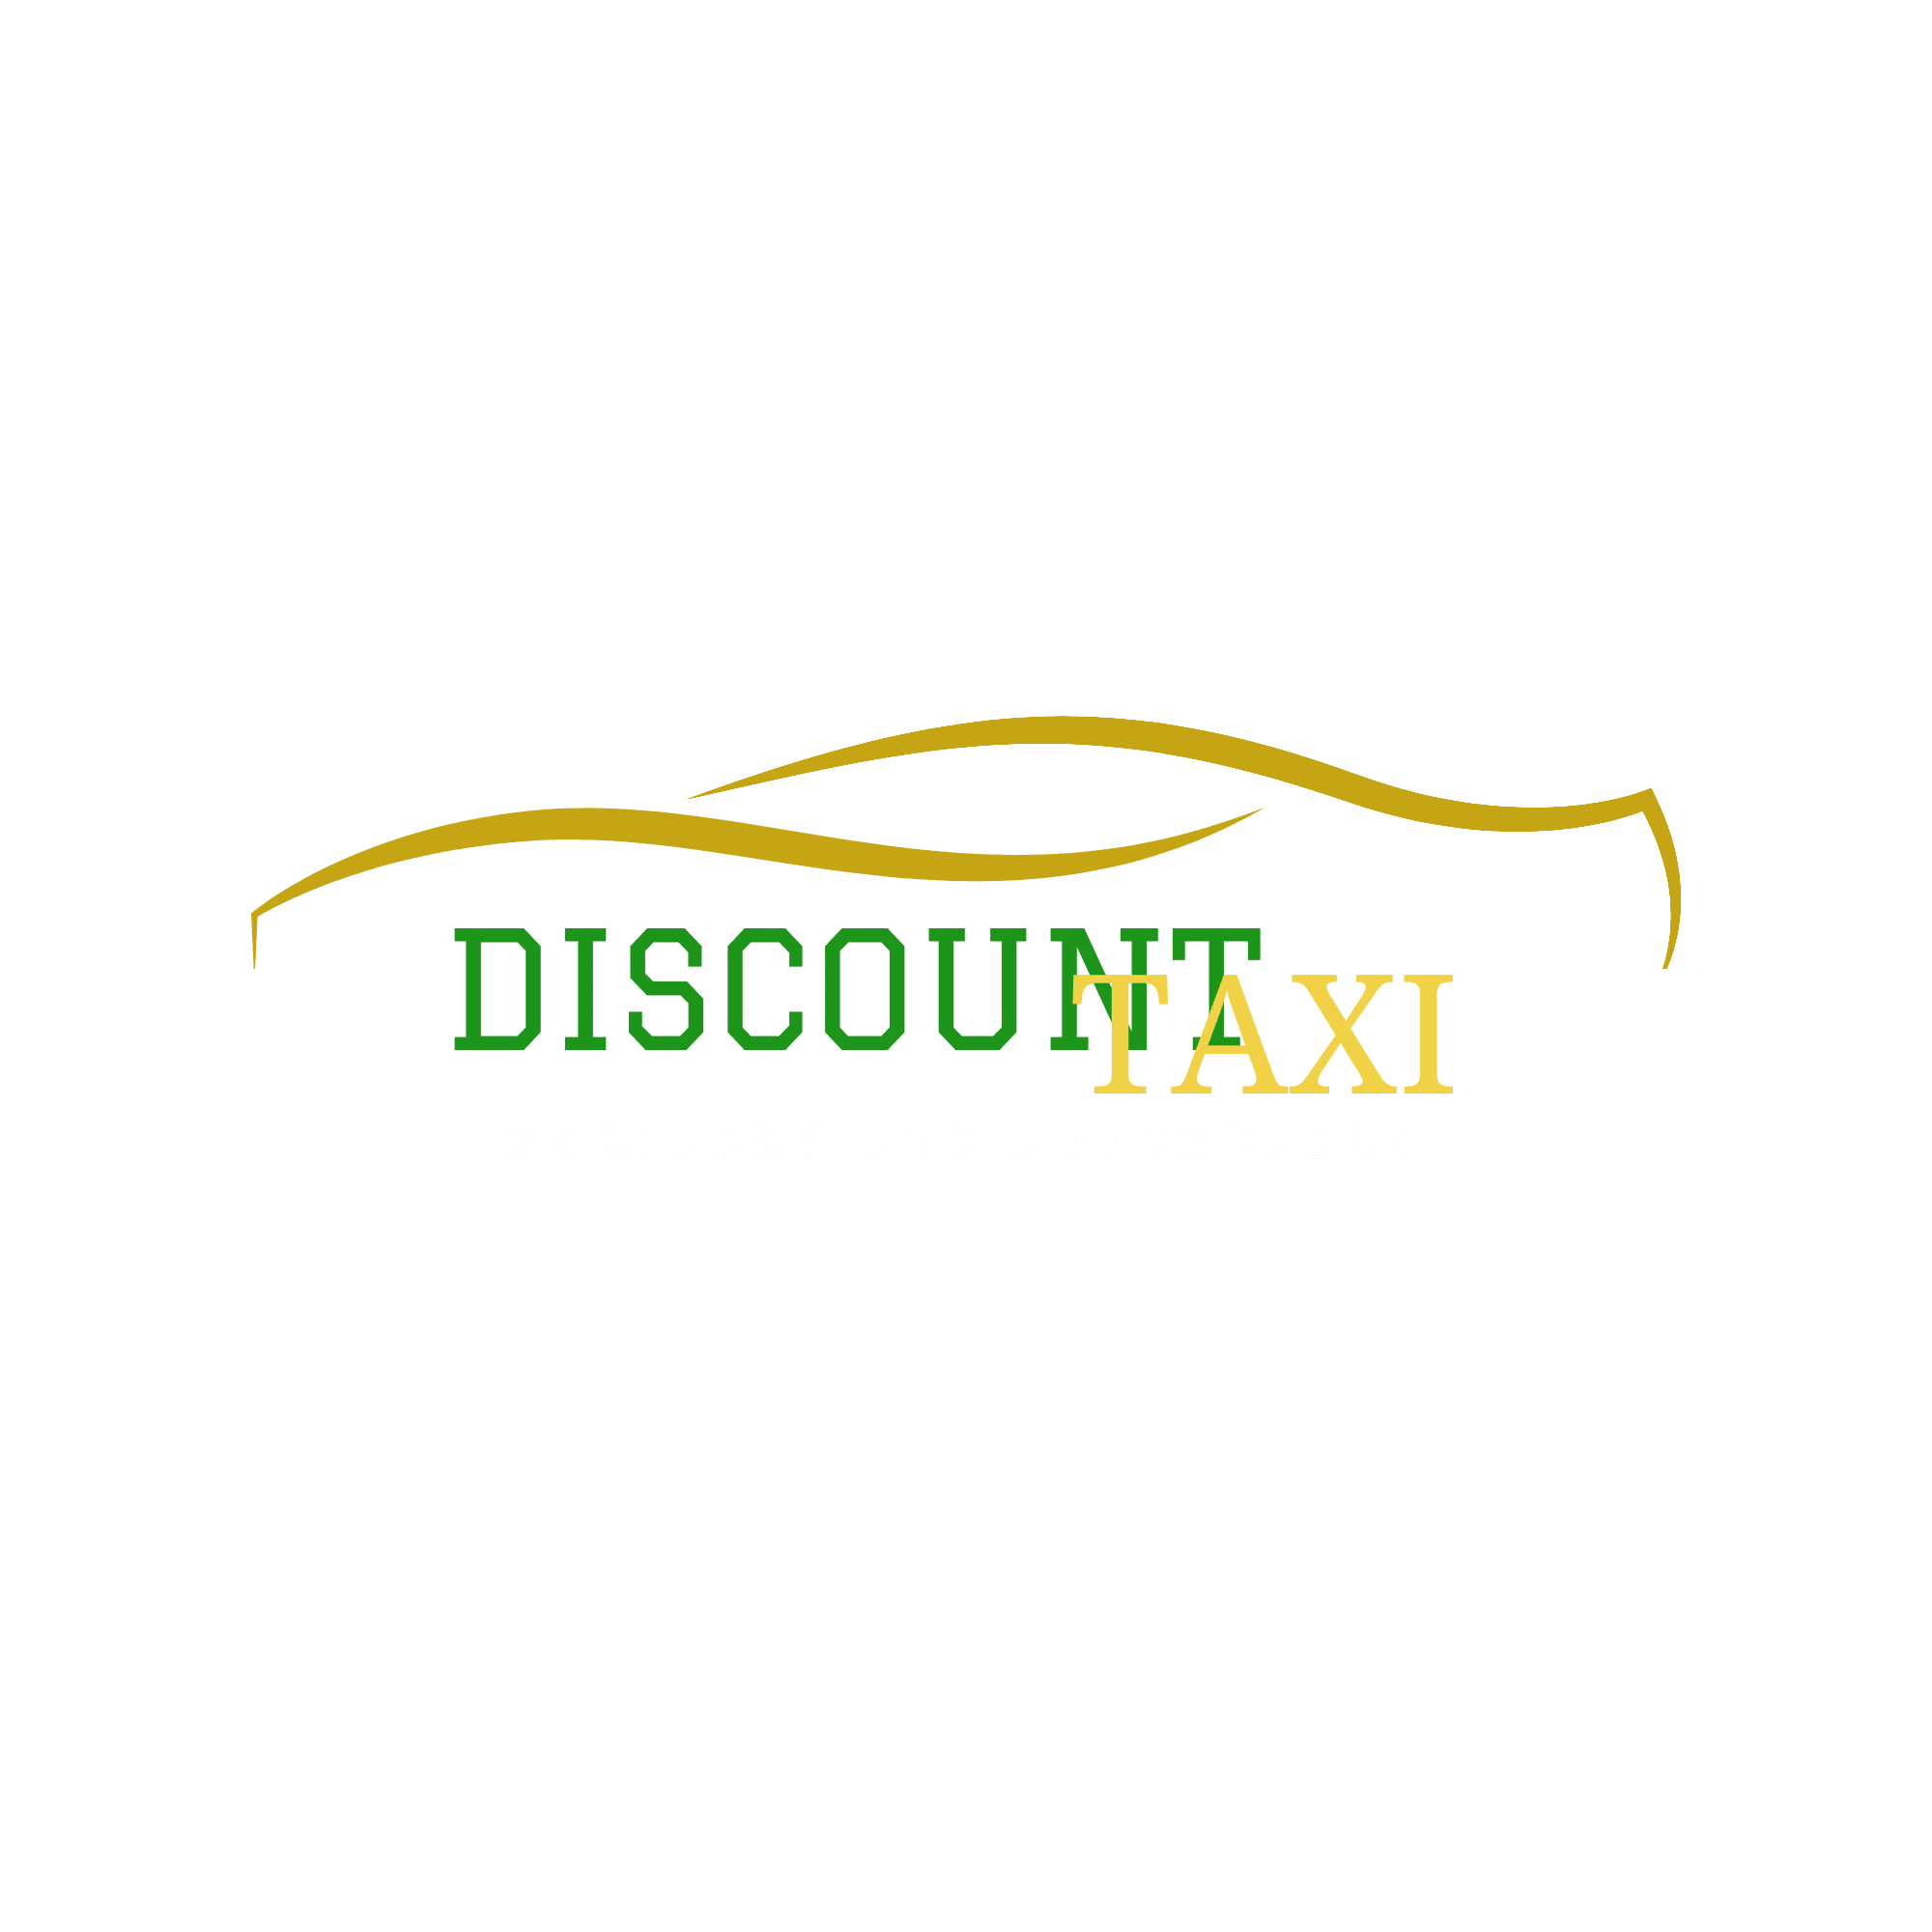 Discount Taxi Co